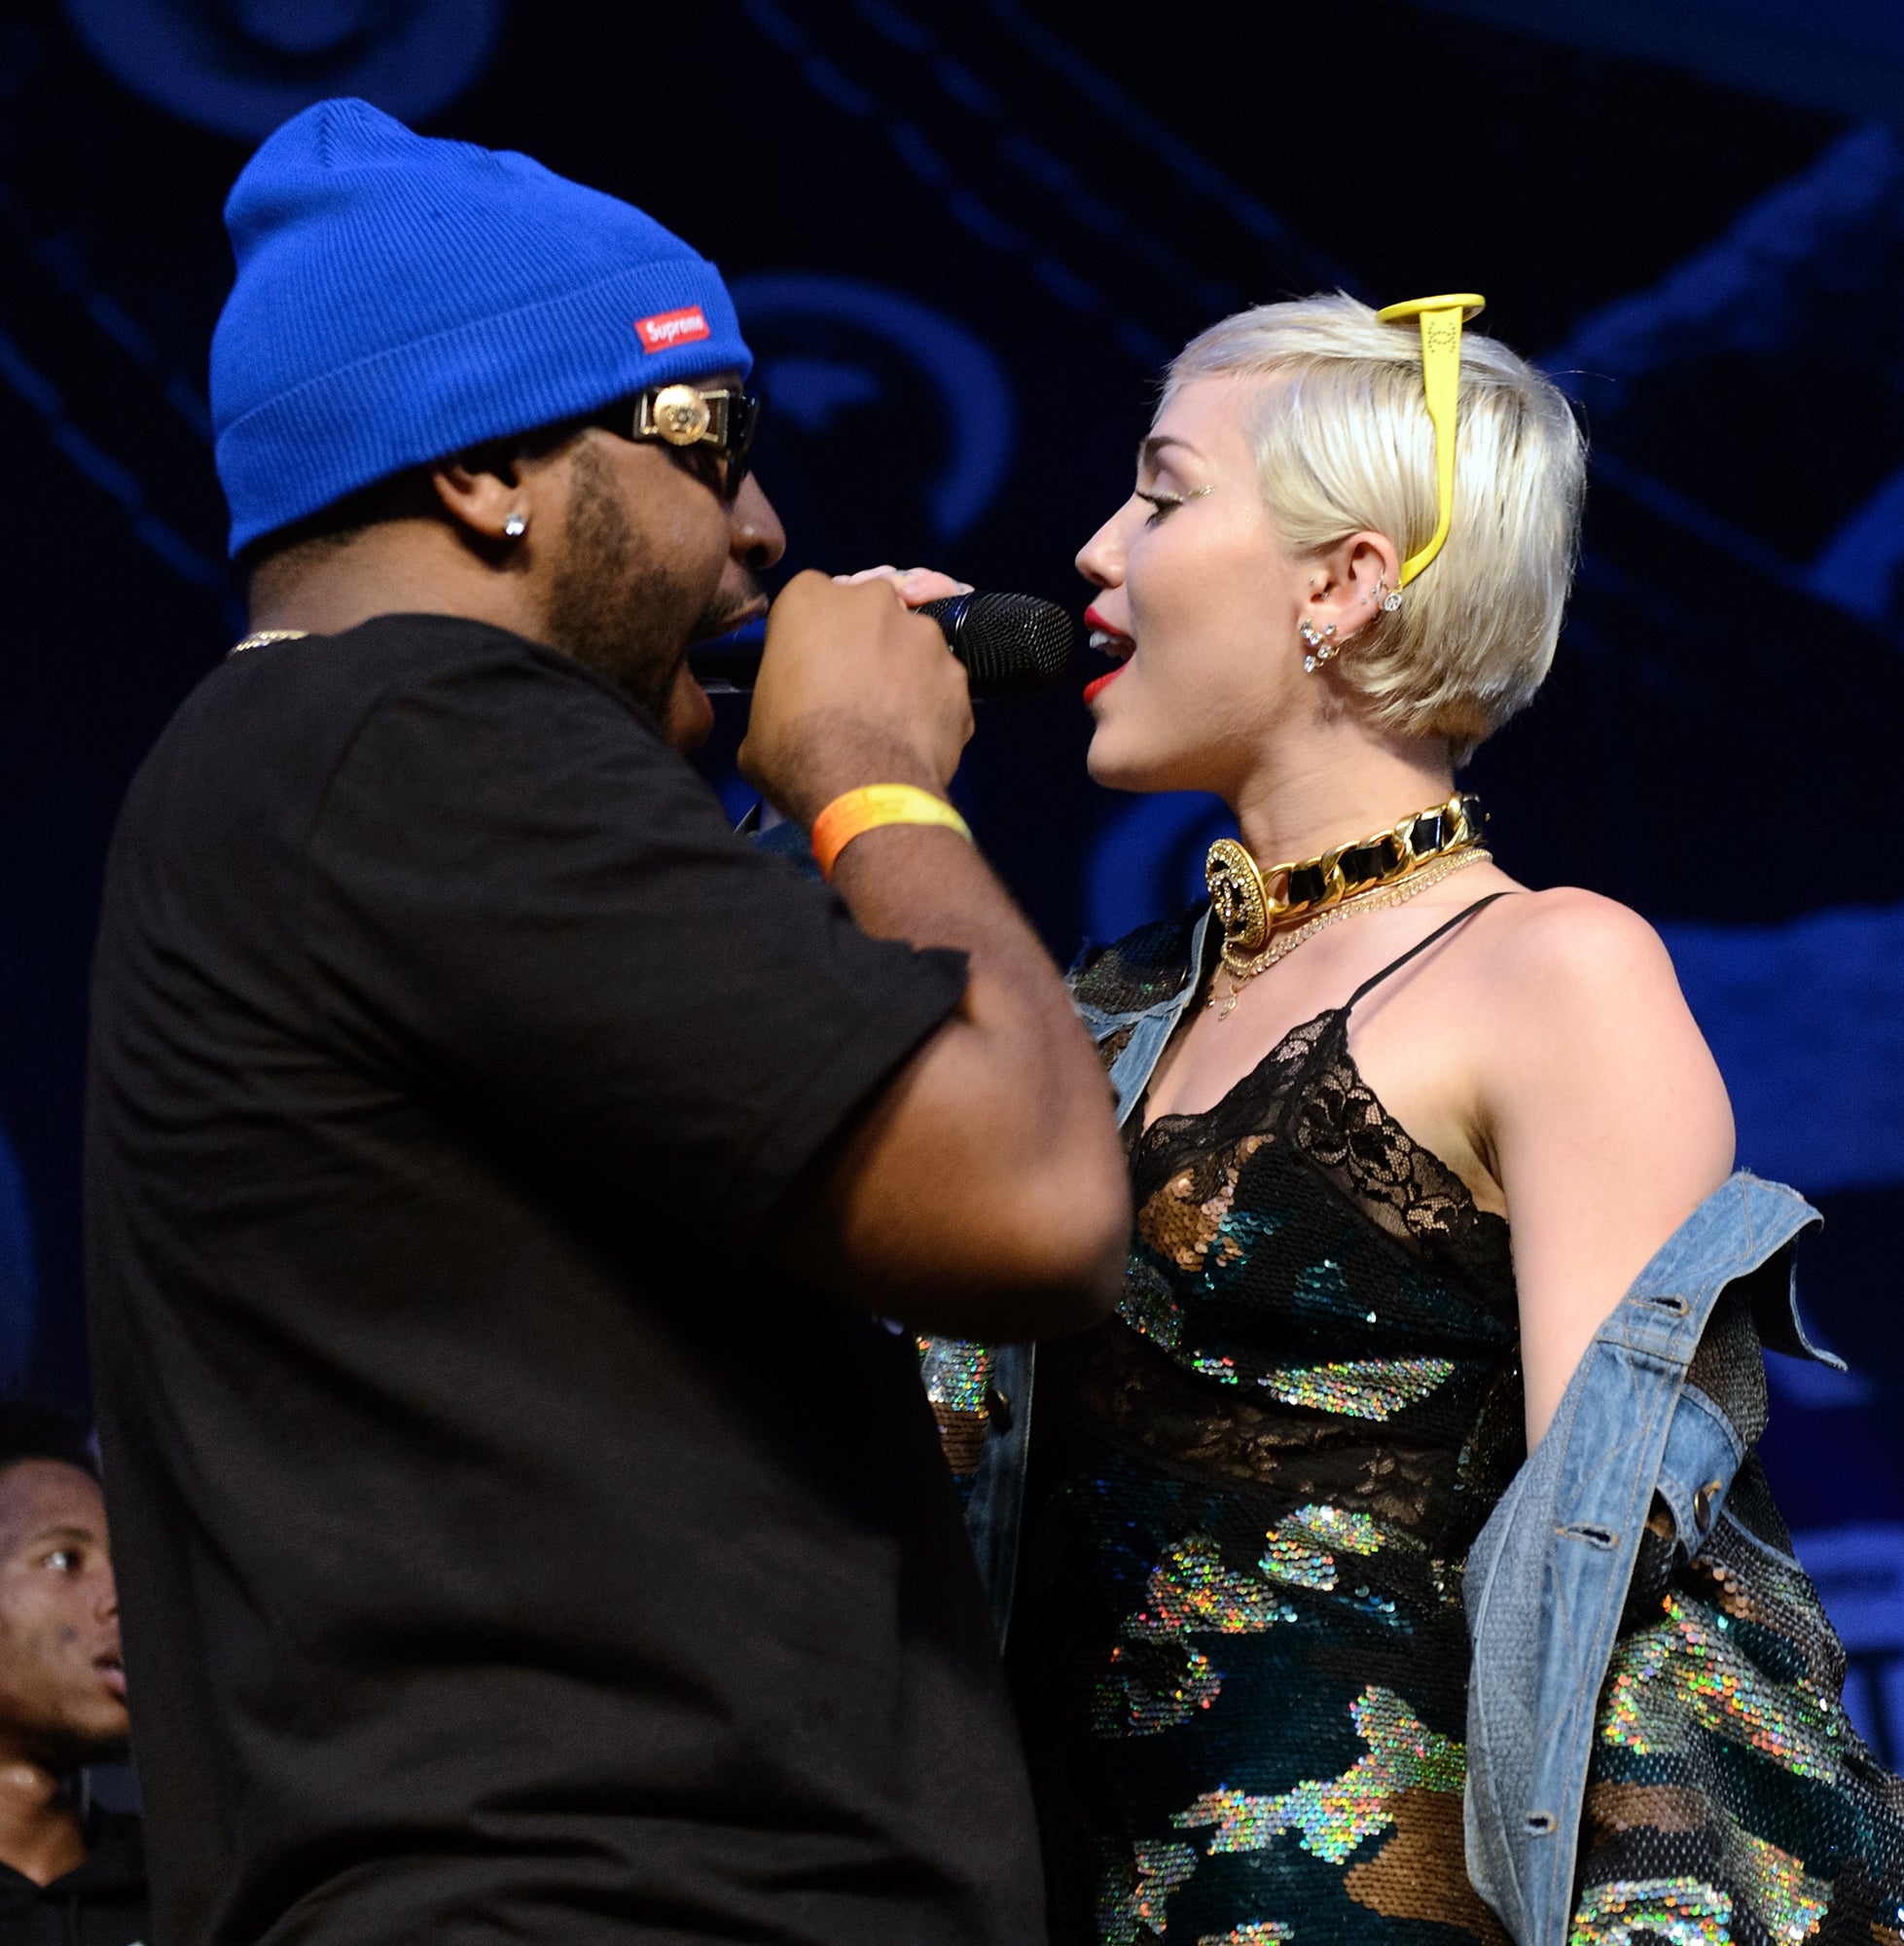 Close-up of Miley and Mike Will Made-It performing onstage